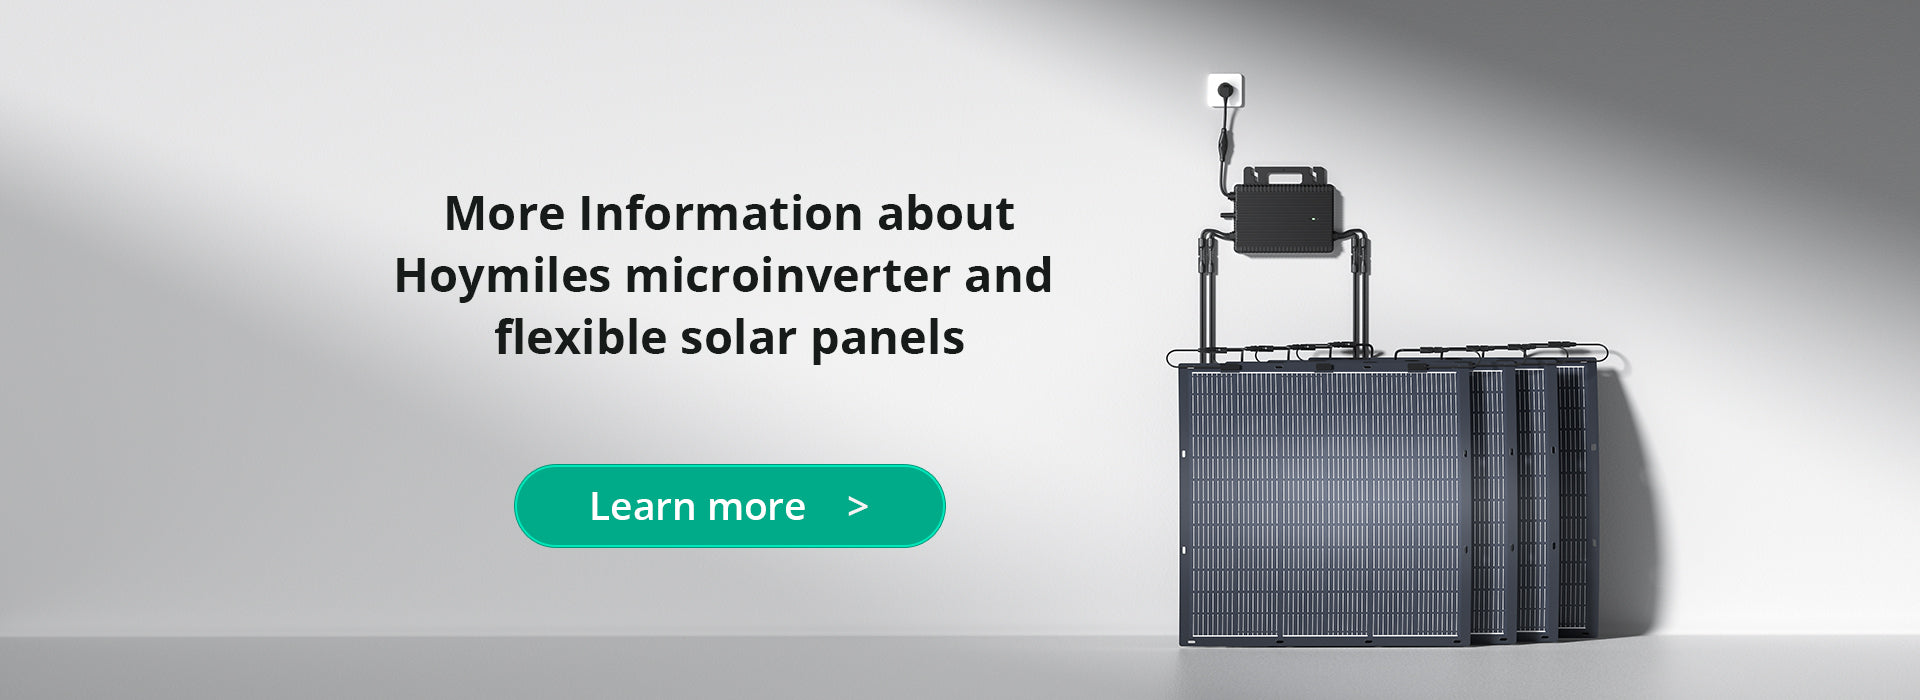 more-info-about-flexible-microinverter-p